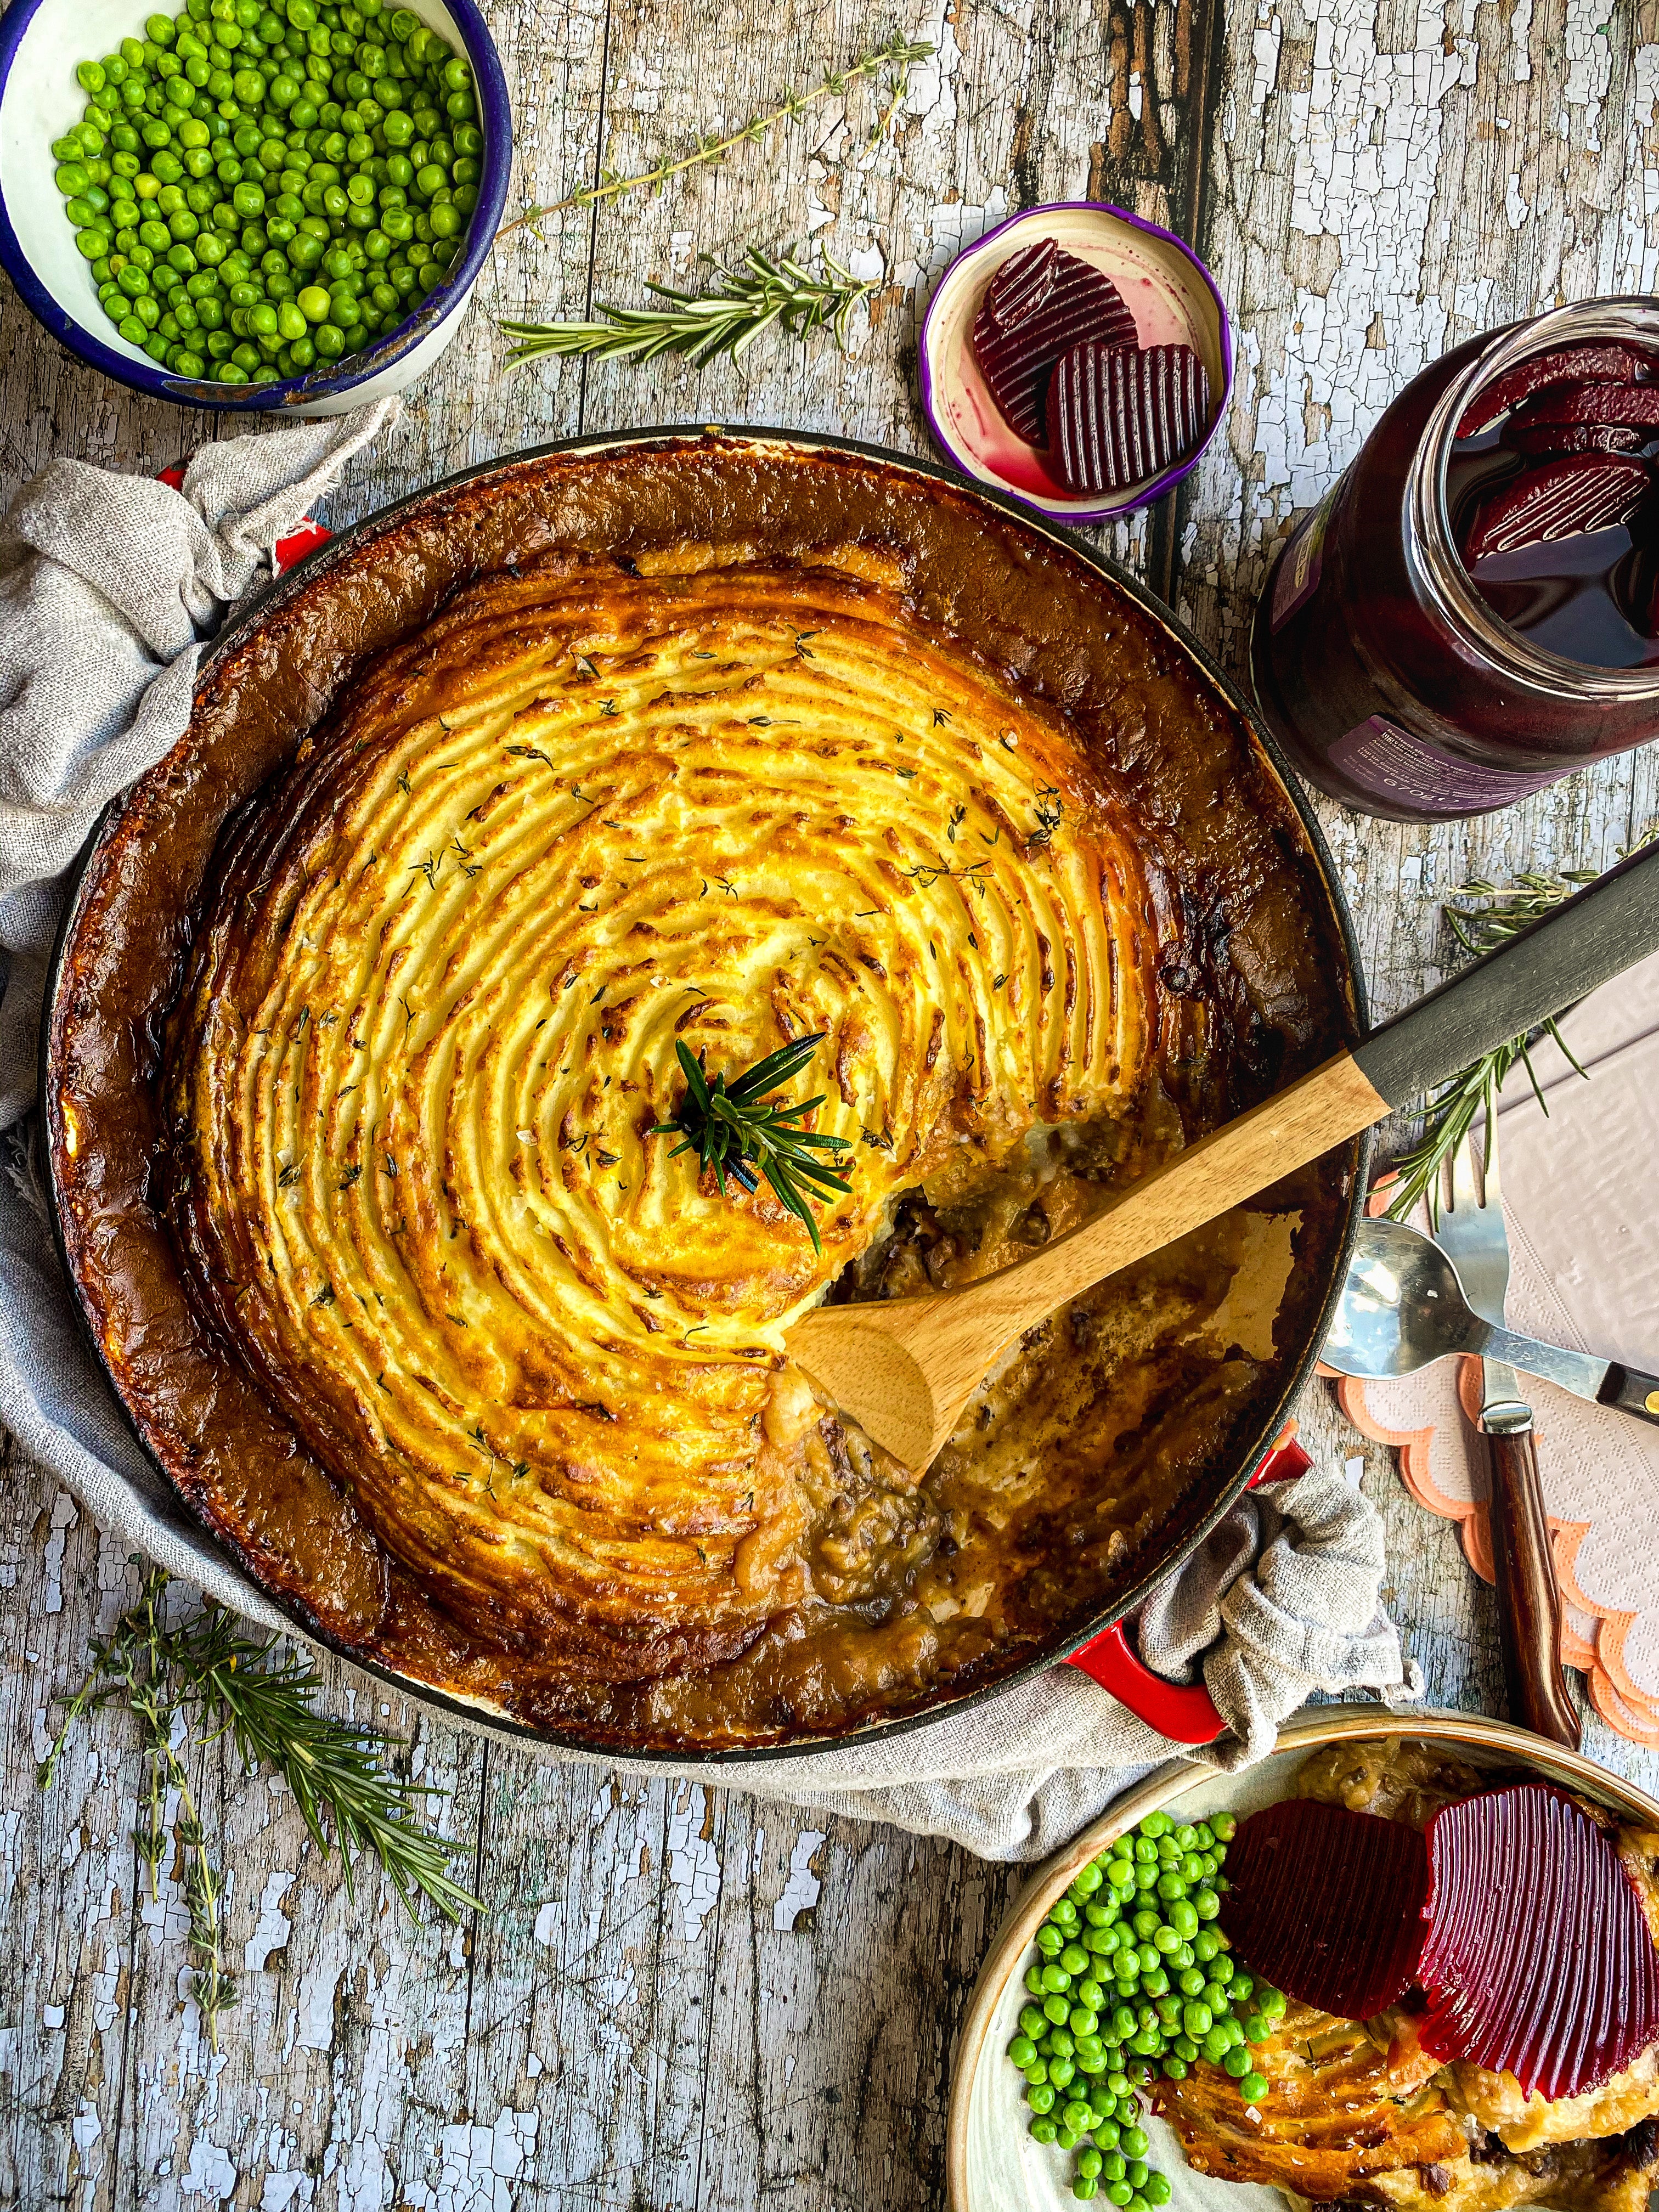 Treated with love, care and attention, shepherd’s pie becomes a thing of beauty